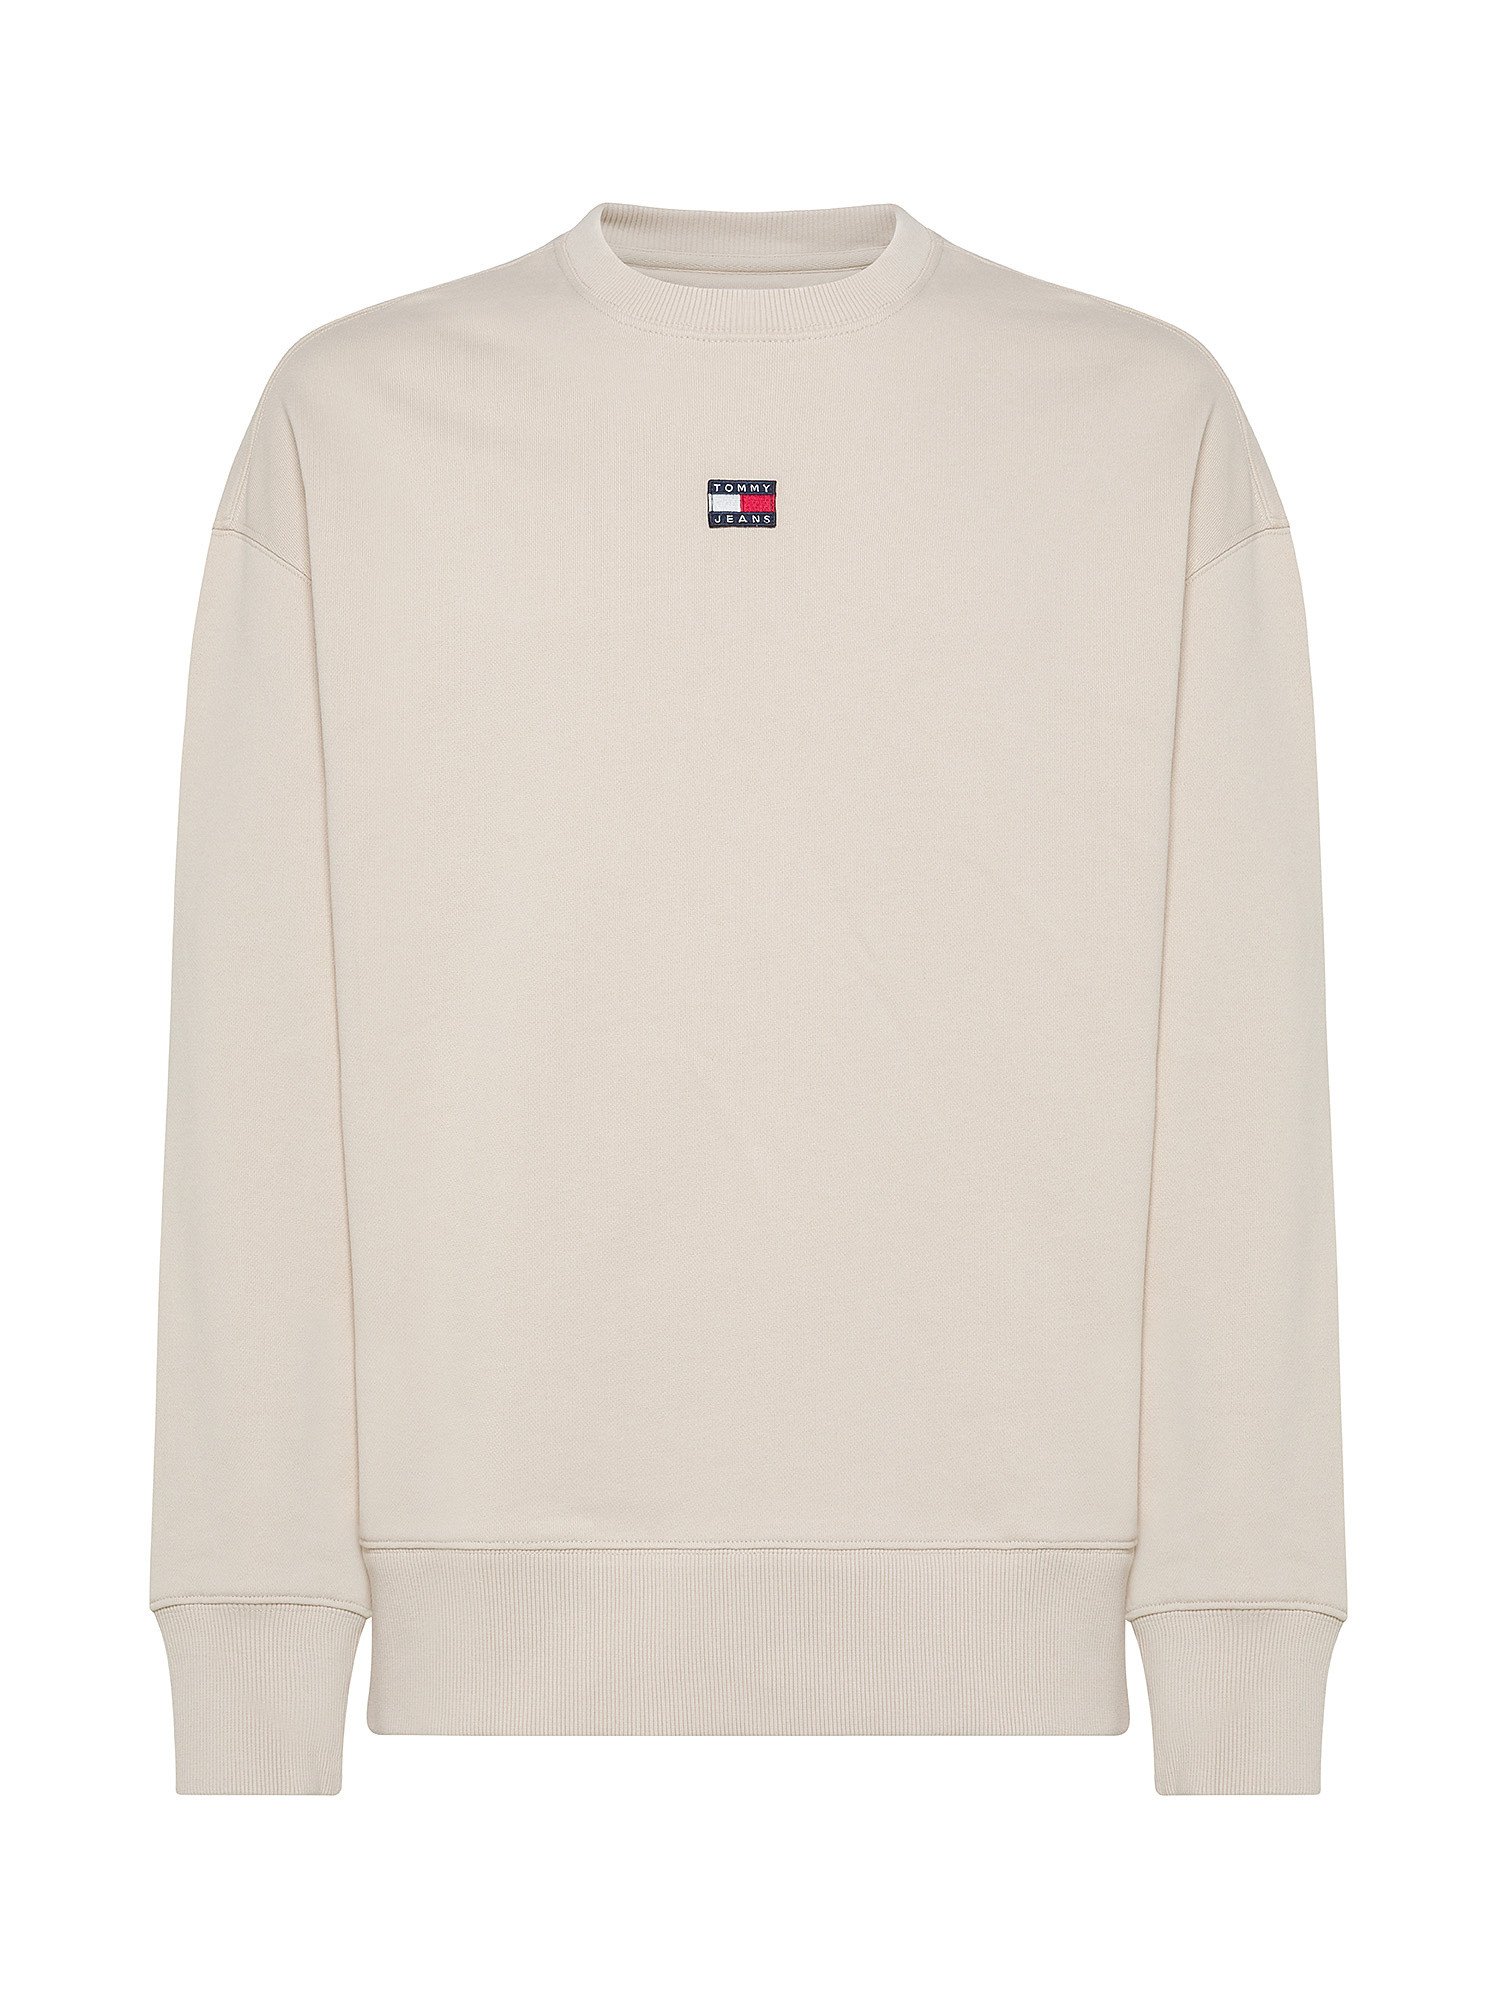 Tommy Jeans - Relaxed fit sweatshirt in cotton with logo, White Ivory, large image number 0